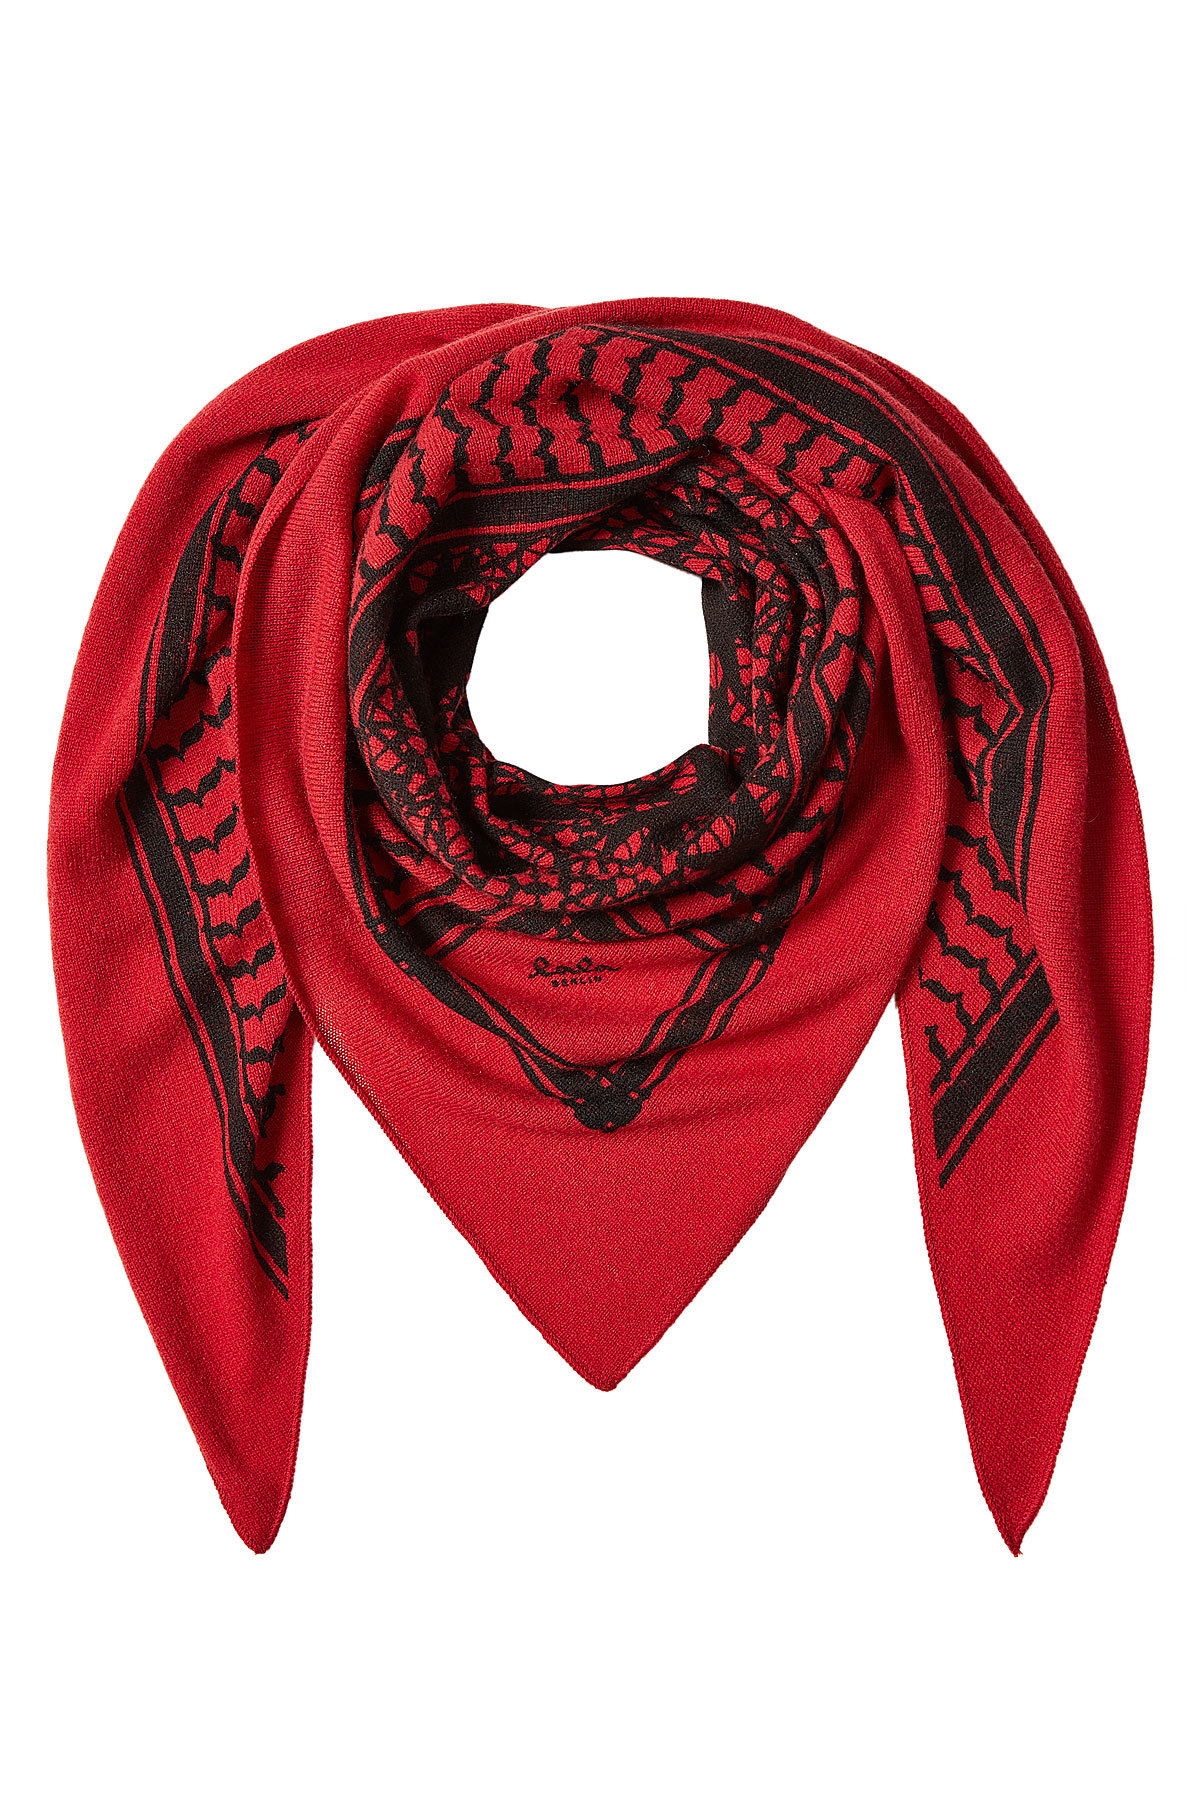 Kufyia Printed Cashmere Scarf by Lala Berlin